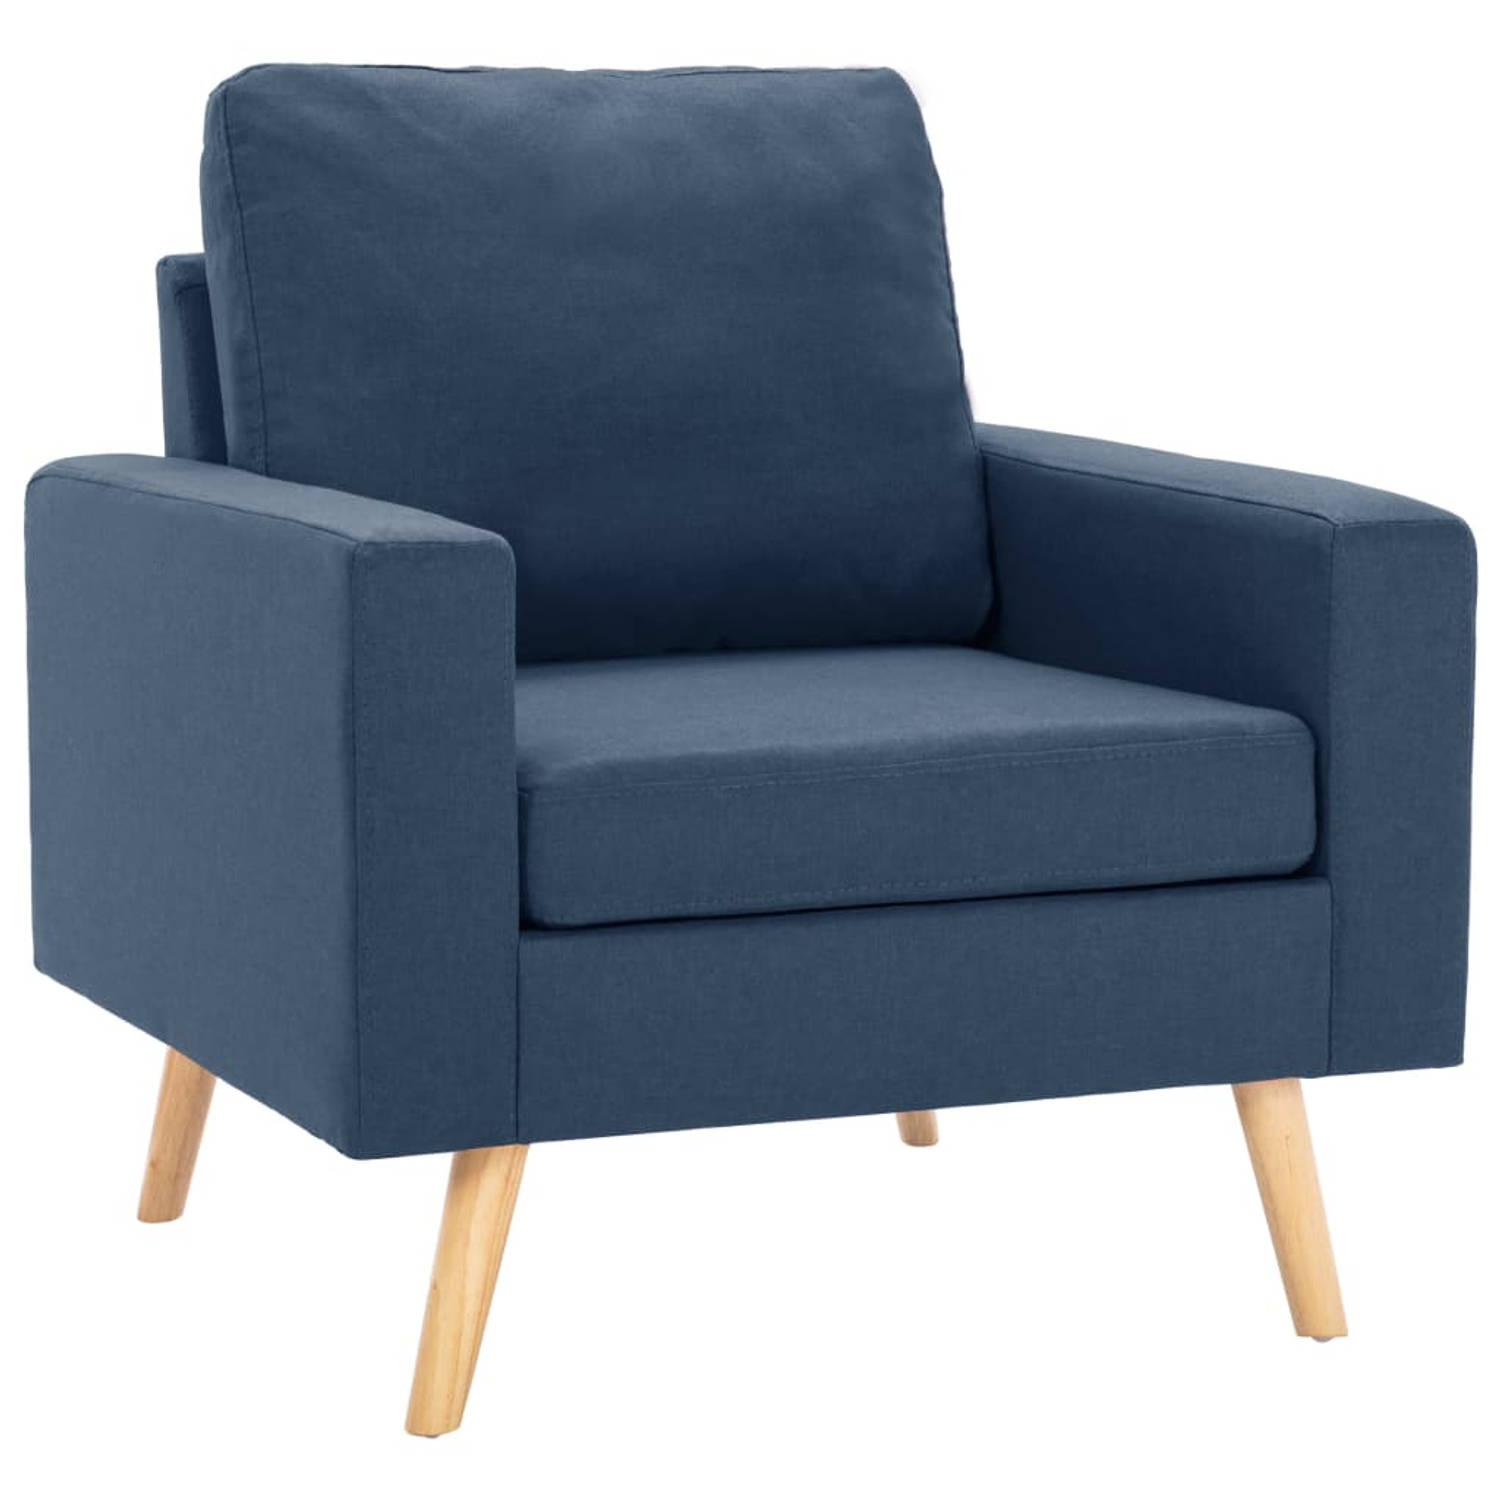 The Living Store Fauteuil stof blauw - Fauteuil